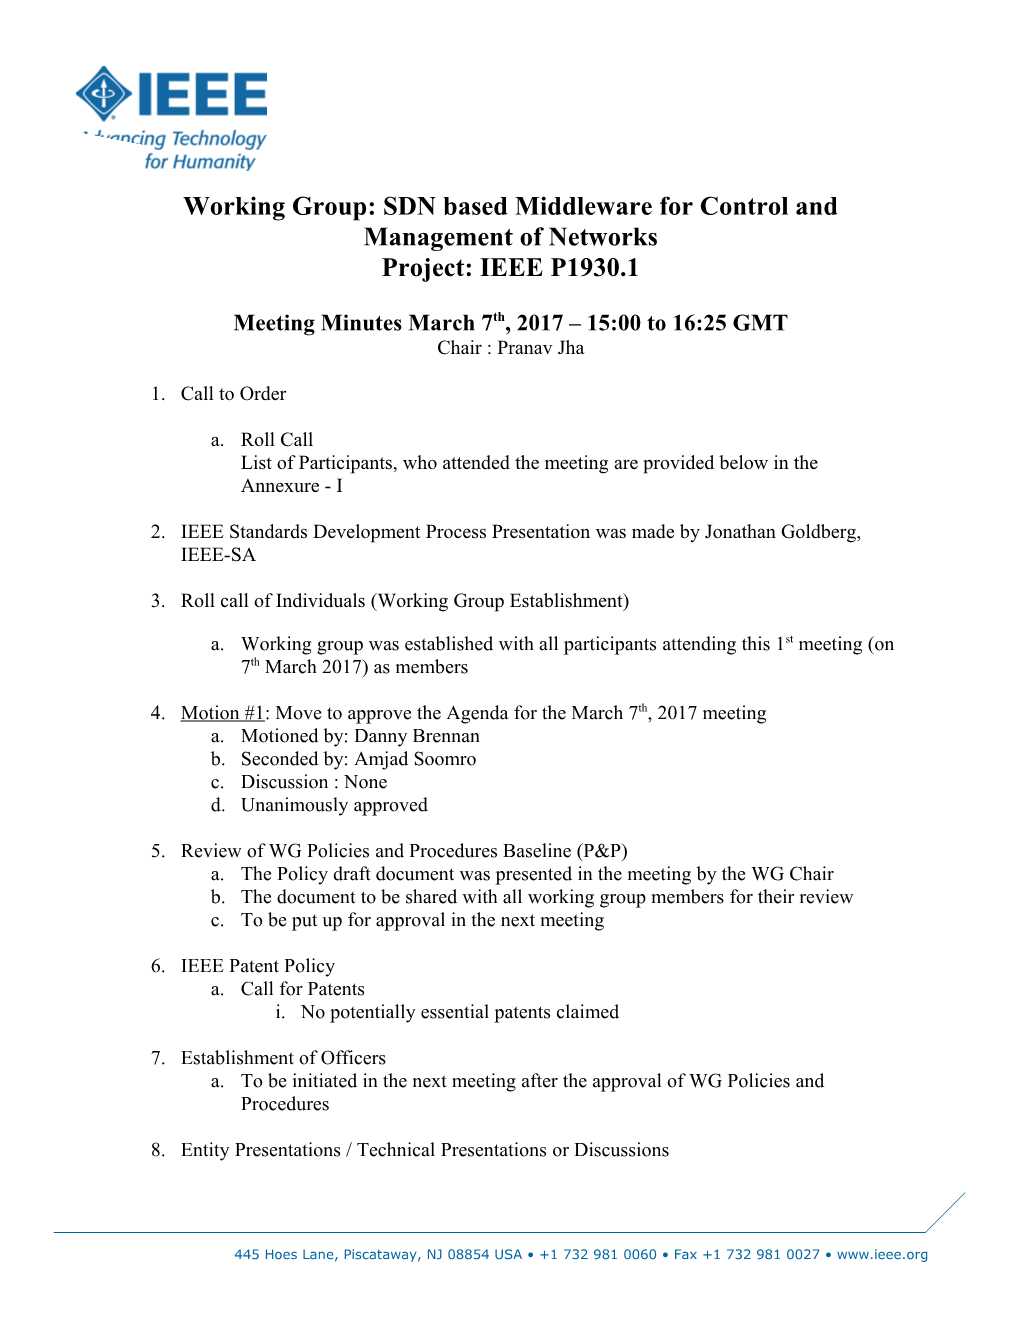 Working Group: SDN Based Middleware for Control and Management of Networks